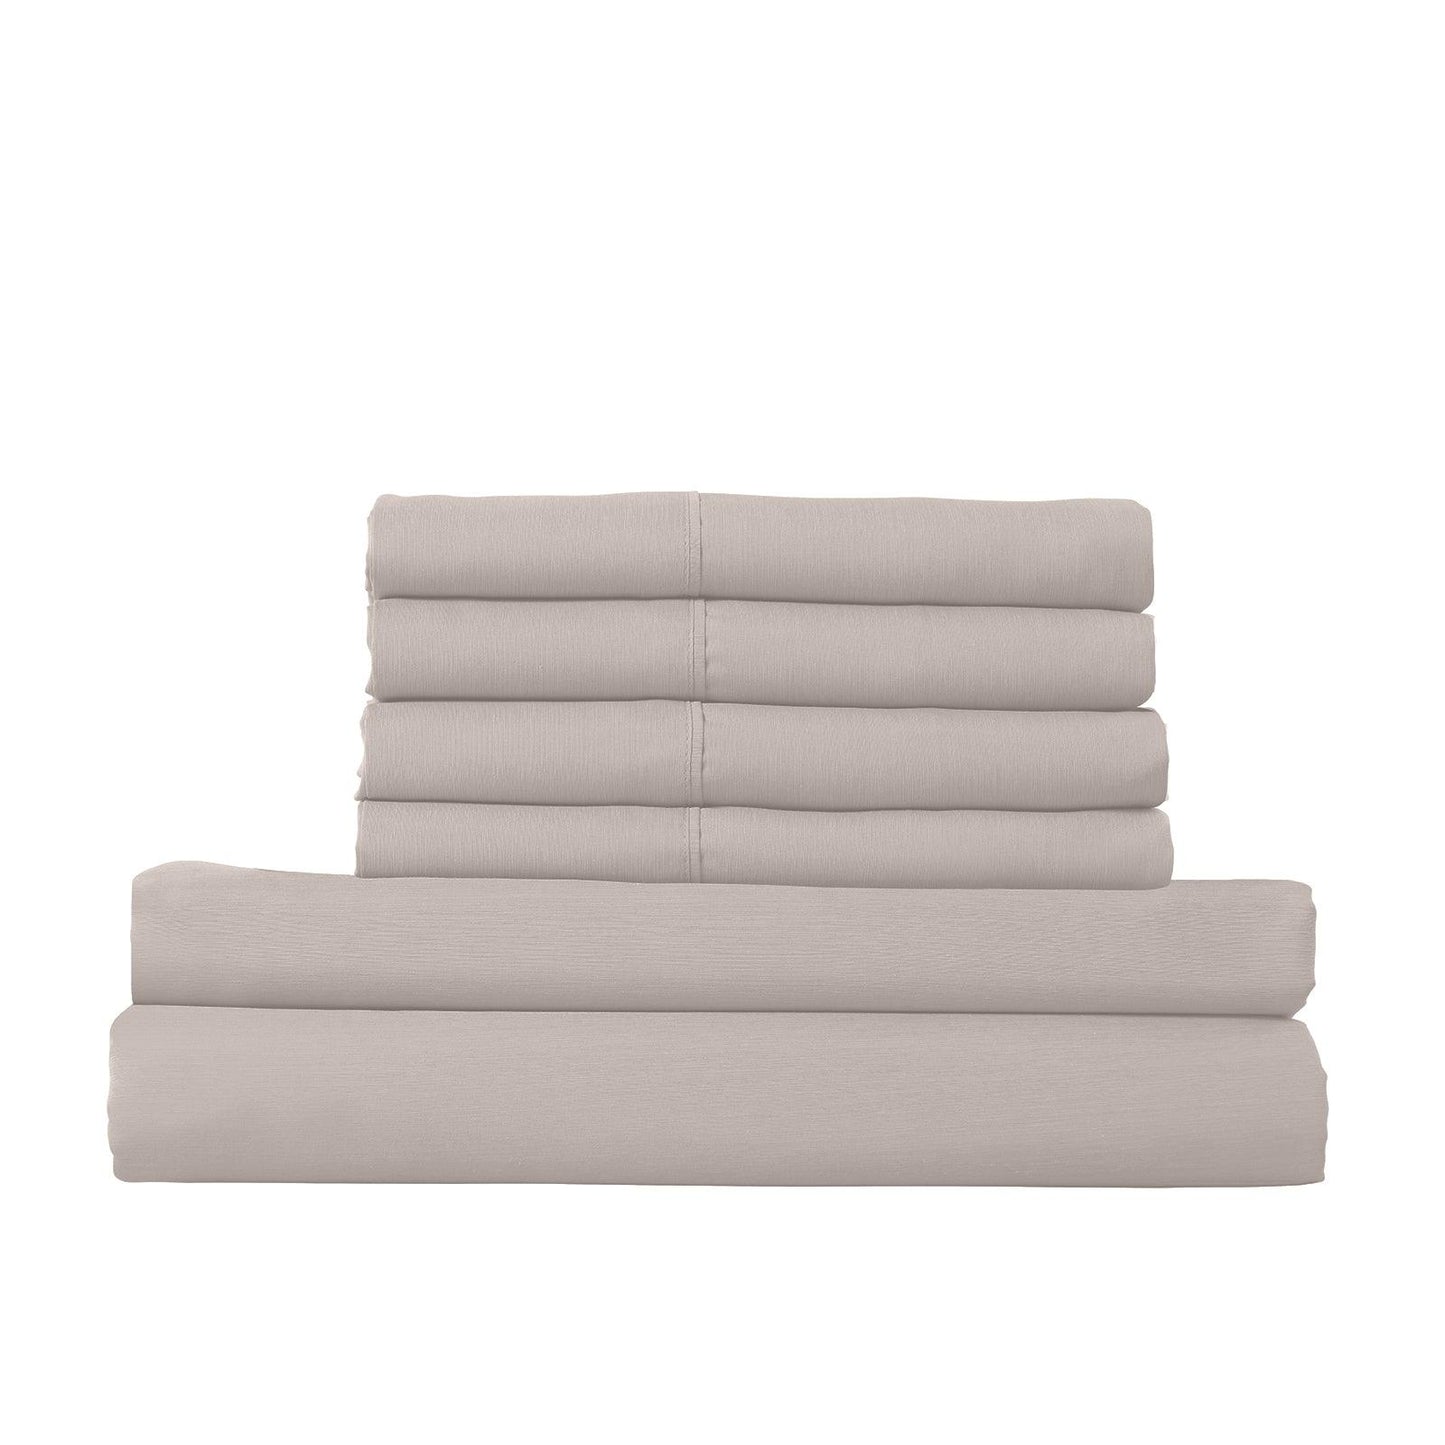 Royal Comfort 1500 Thread Count 6 Piece Cotton Rich Bedroom Collection Set - Queen - Stone